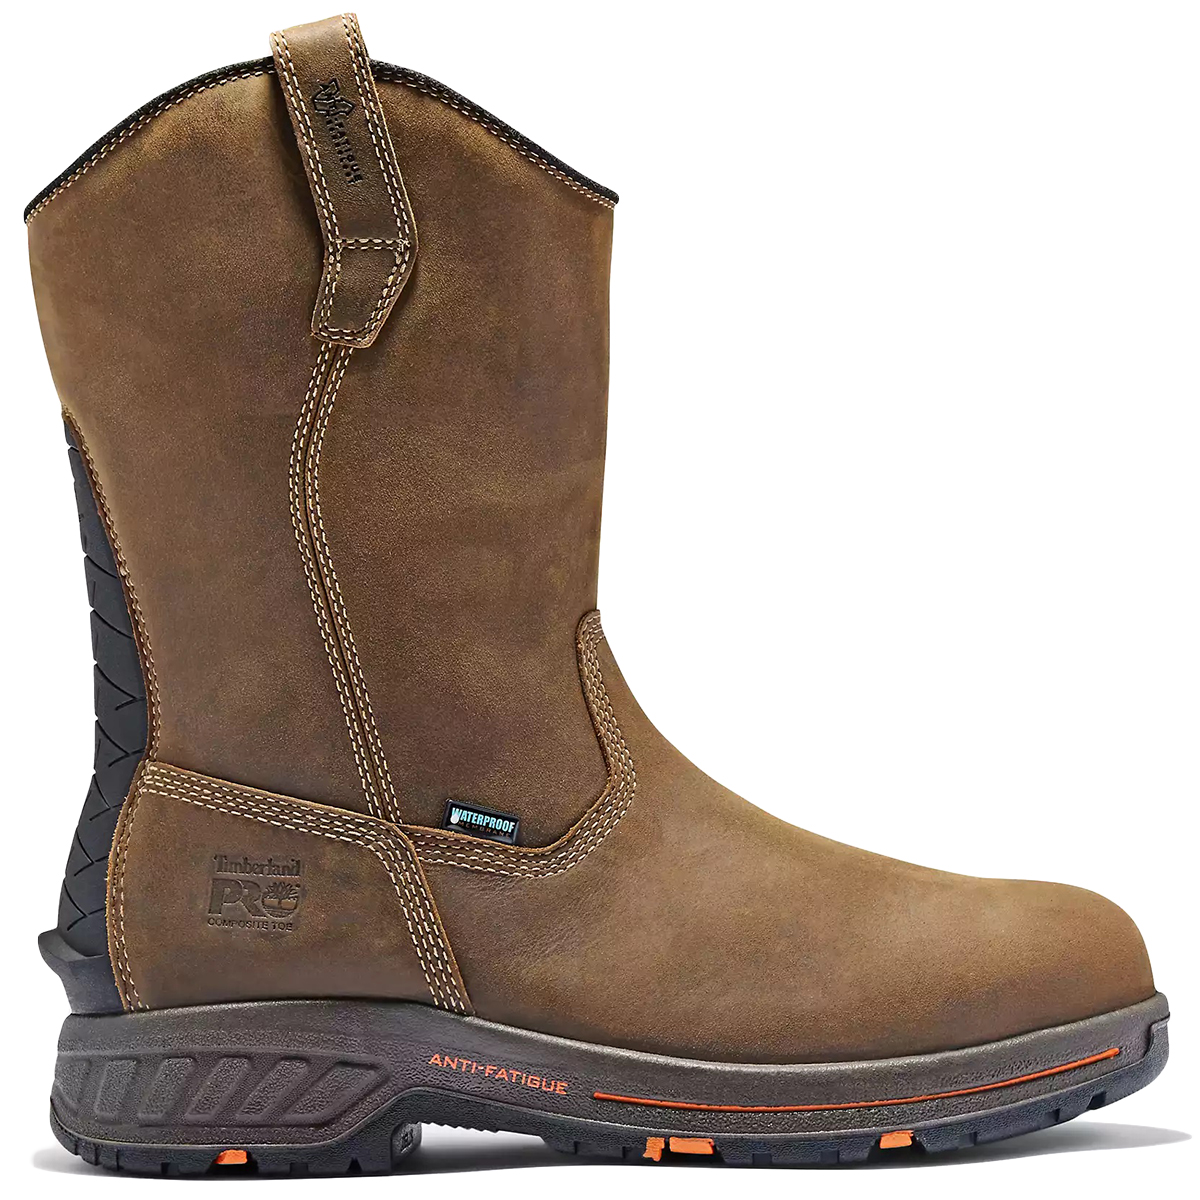 Timberland Pro Men's Helix Hd Pull On Comp Toe Waterproof Work Boots